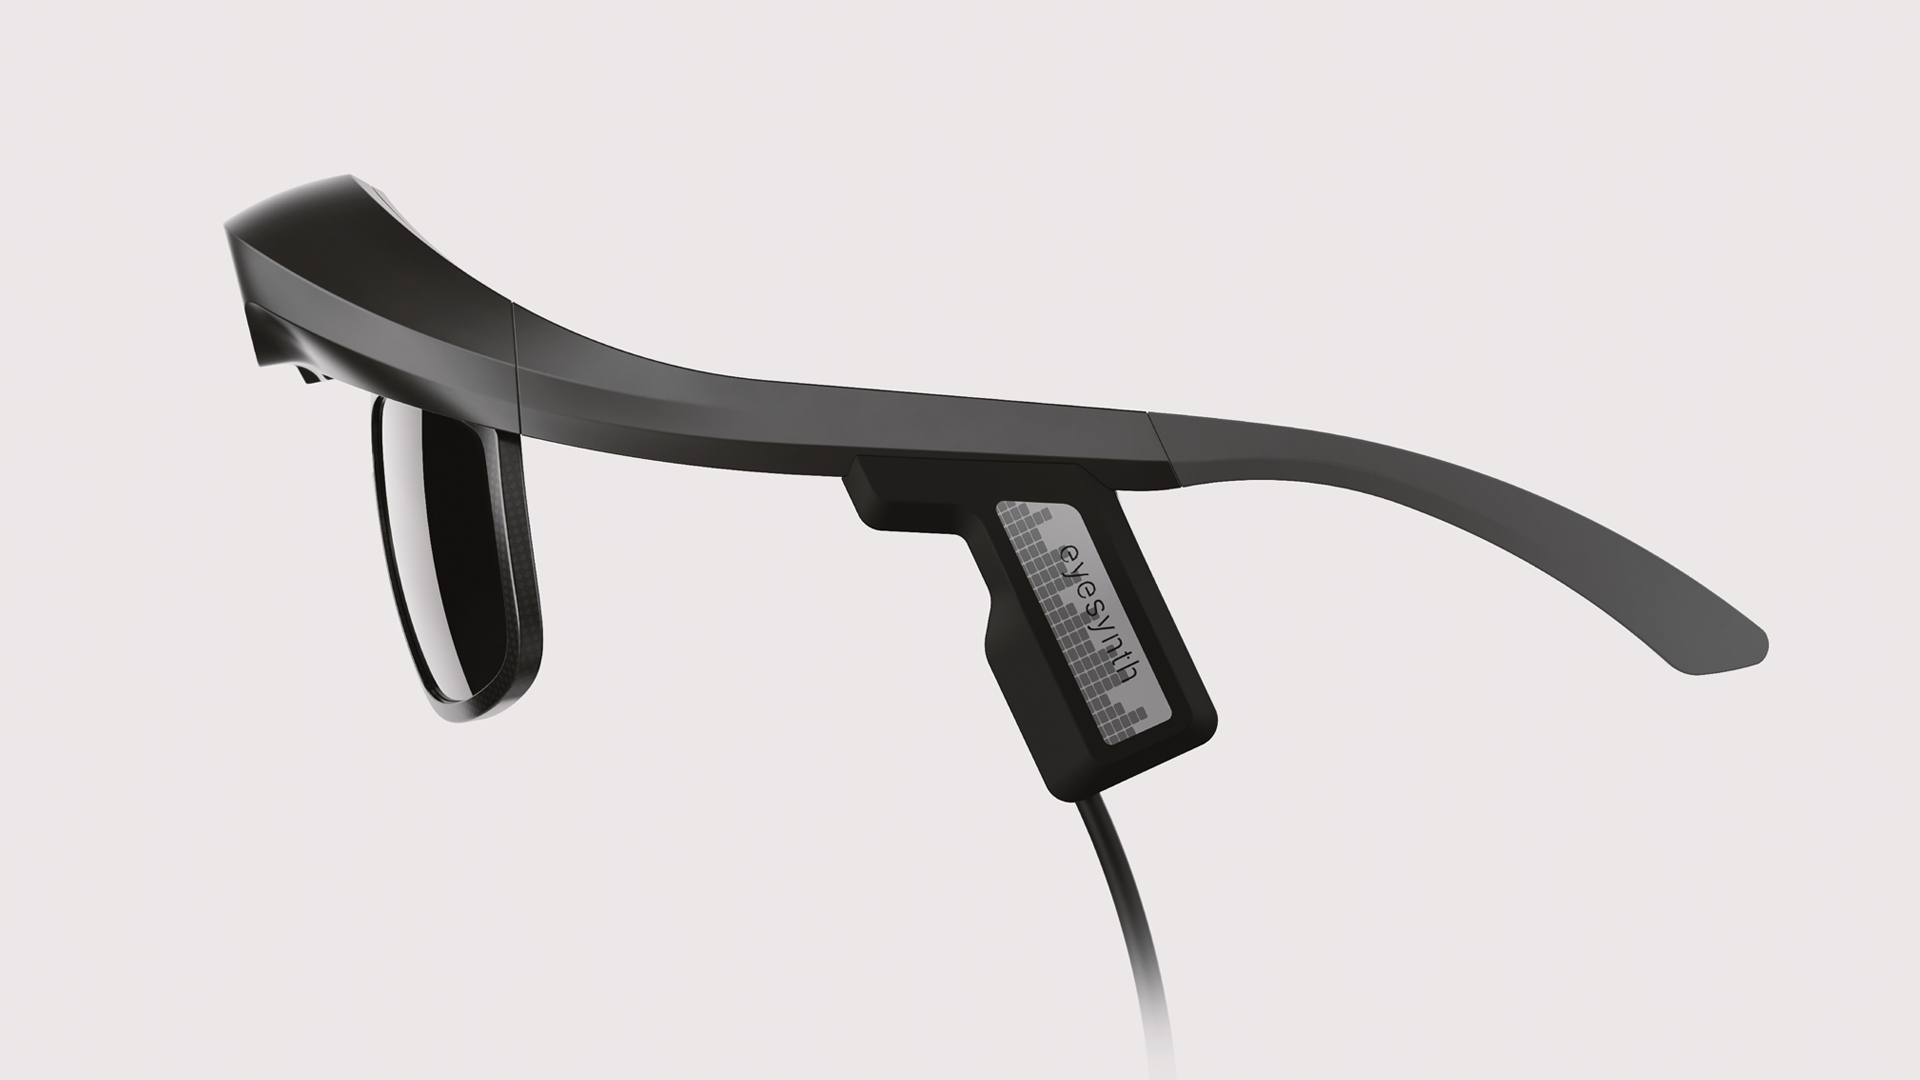 Electronic glasses for blindness and low vision